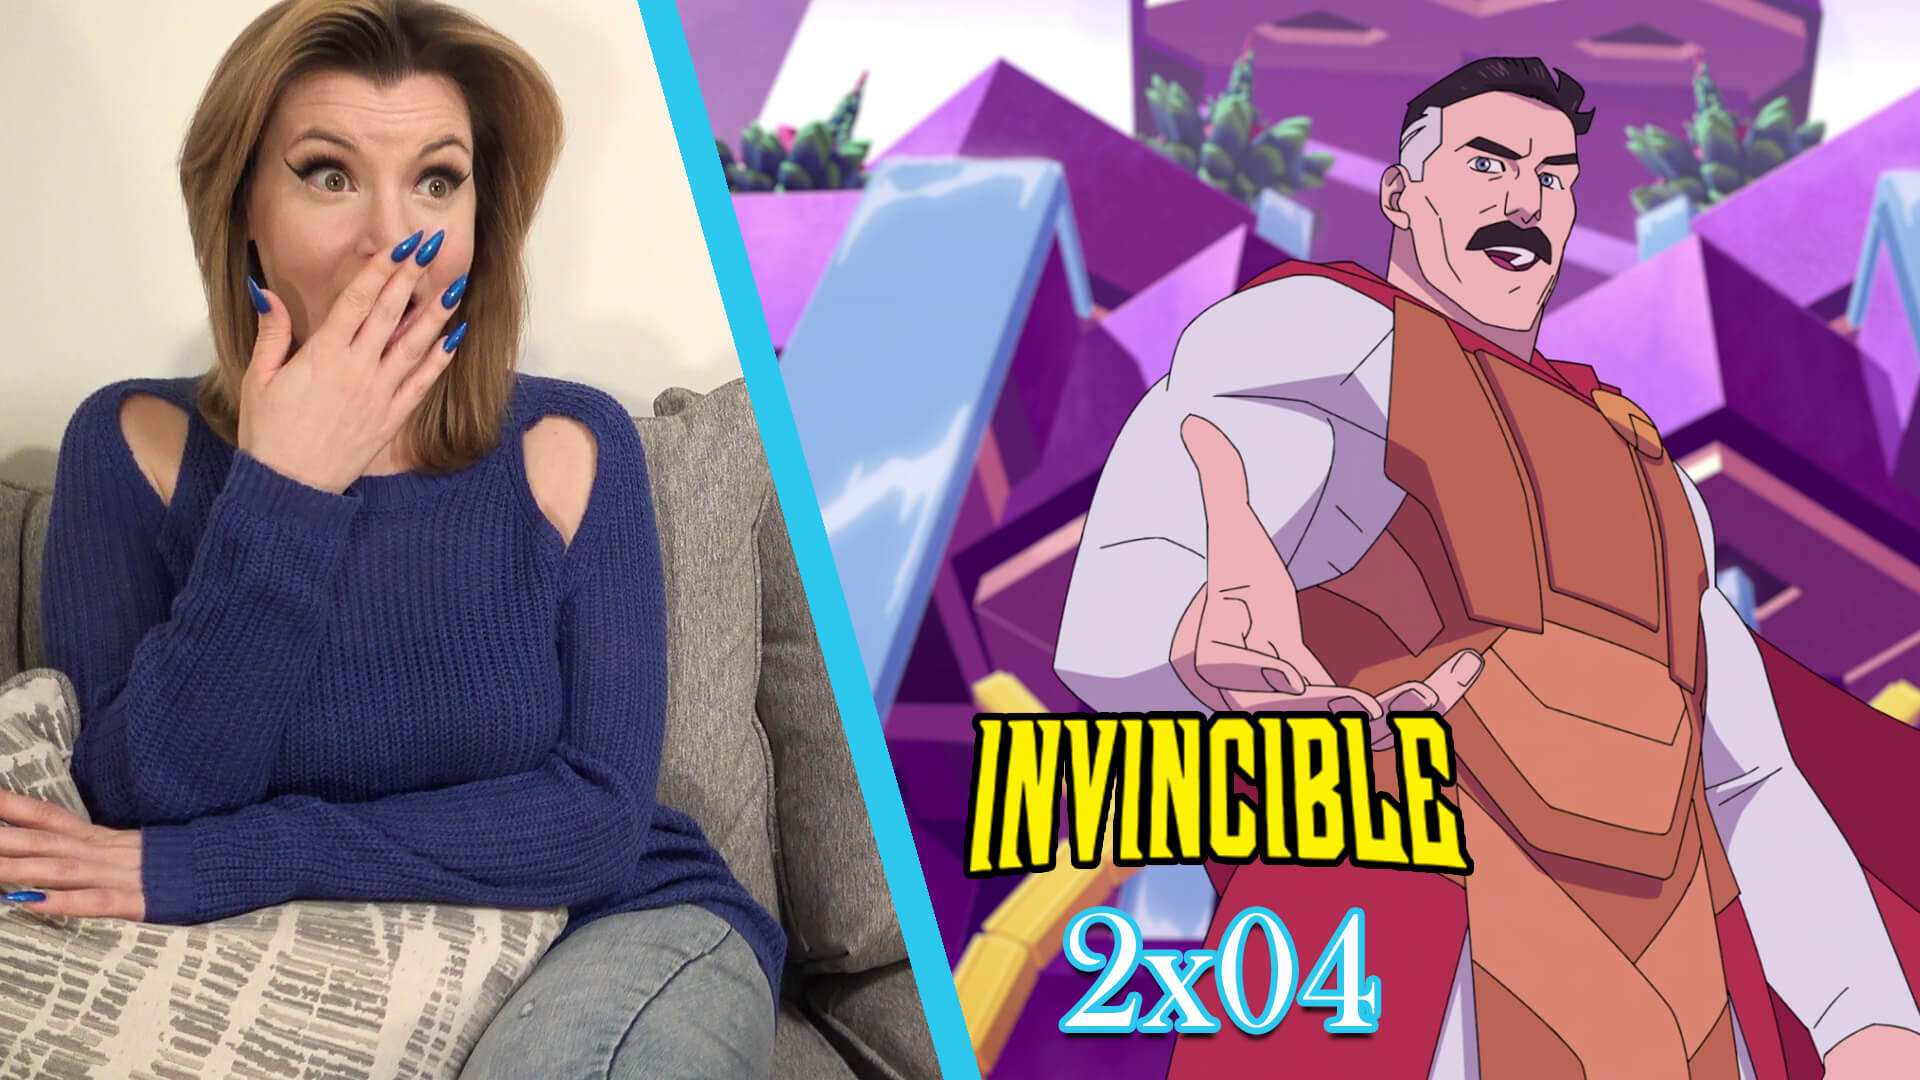 Invincible 2x04 Full Reaction - Sesskasays